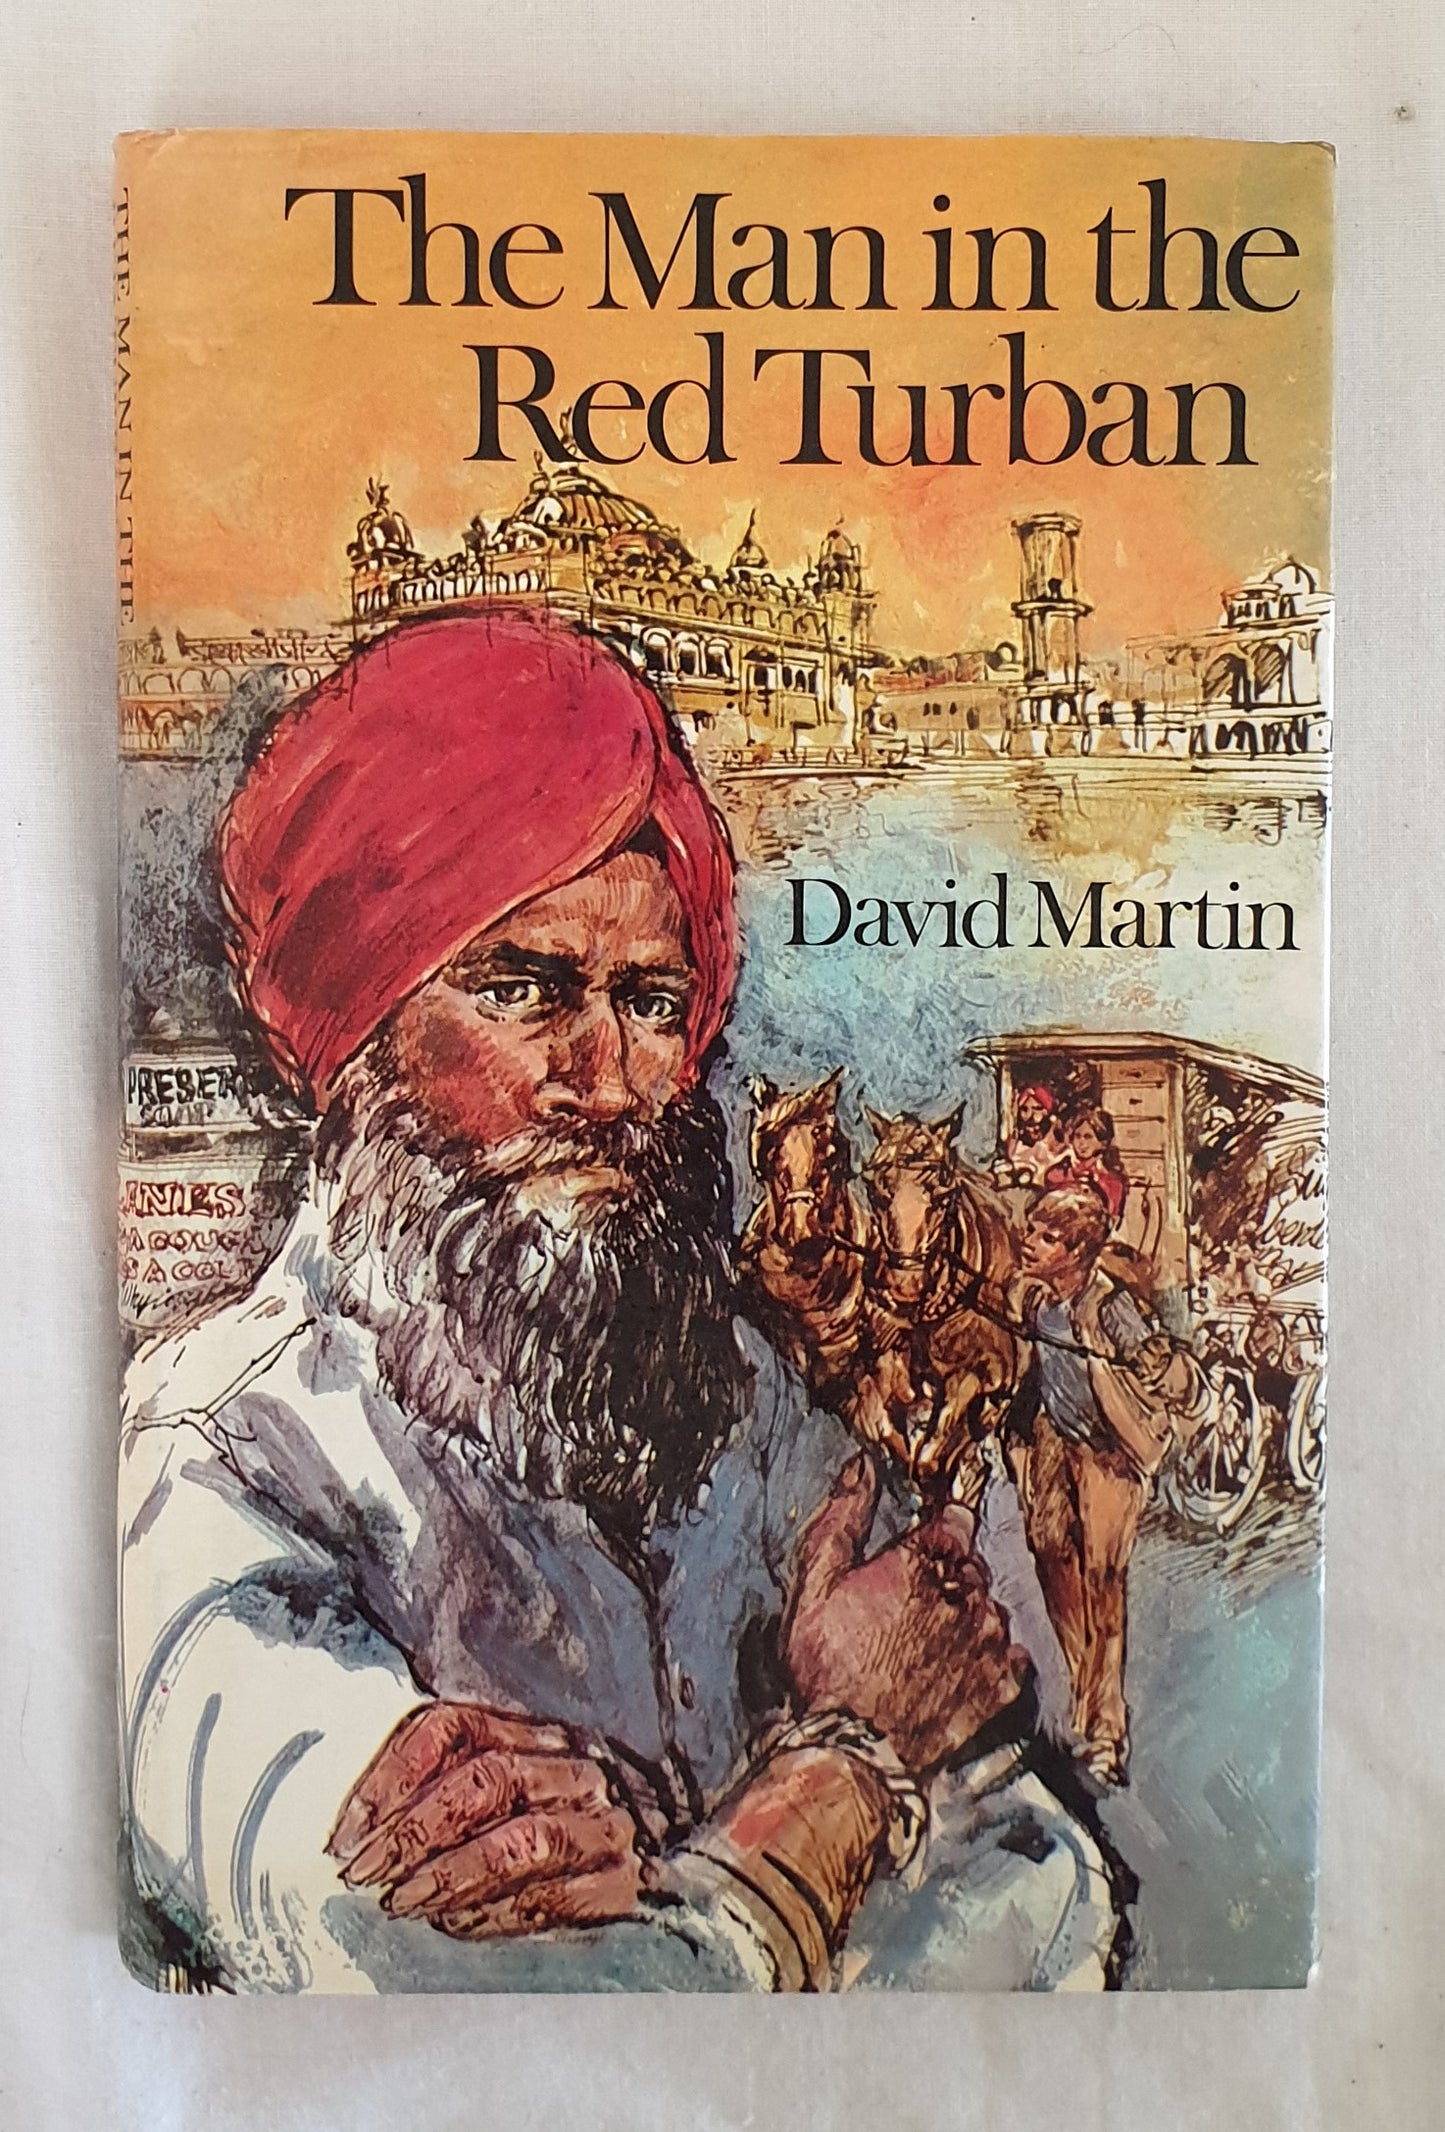 The Man in the Red Turban by David Martin